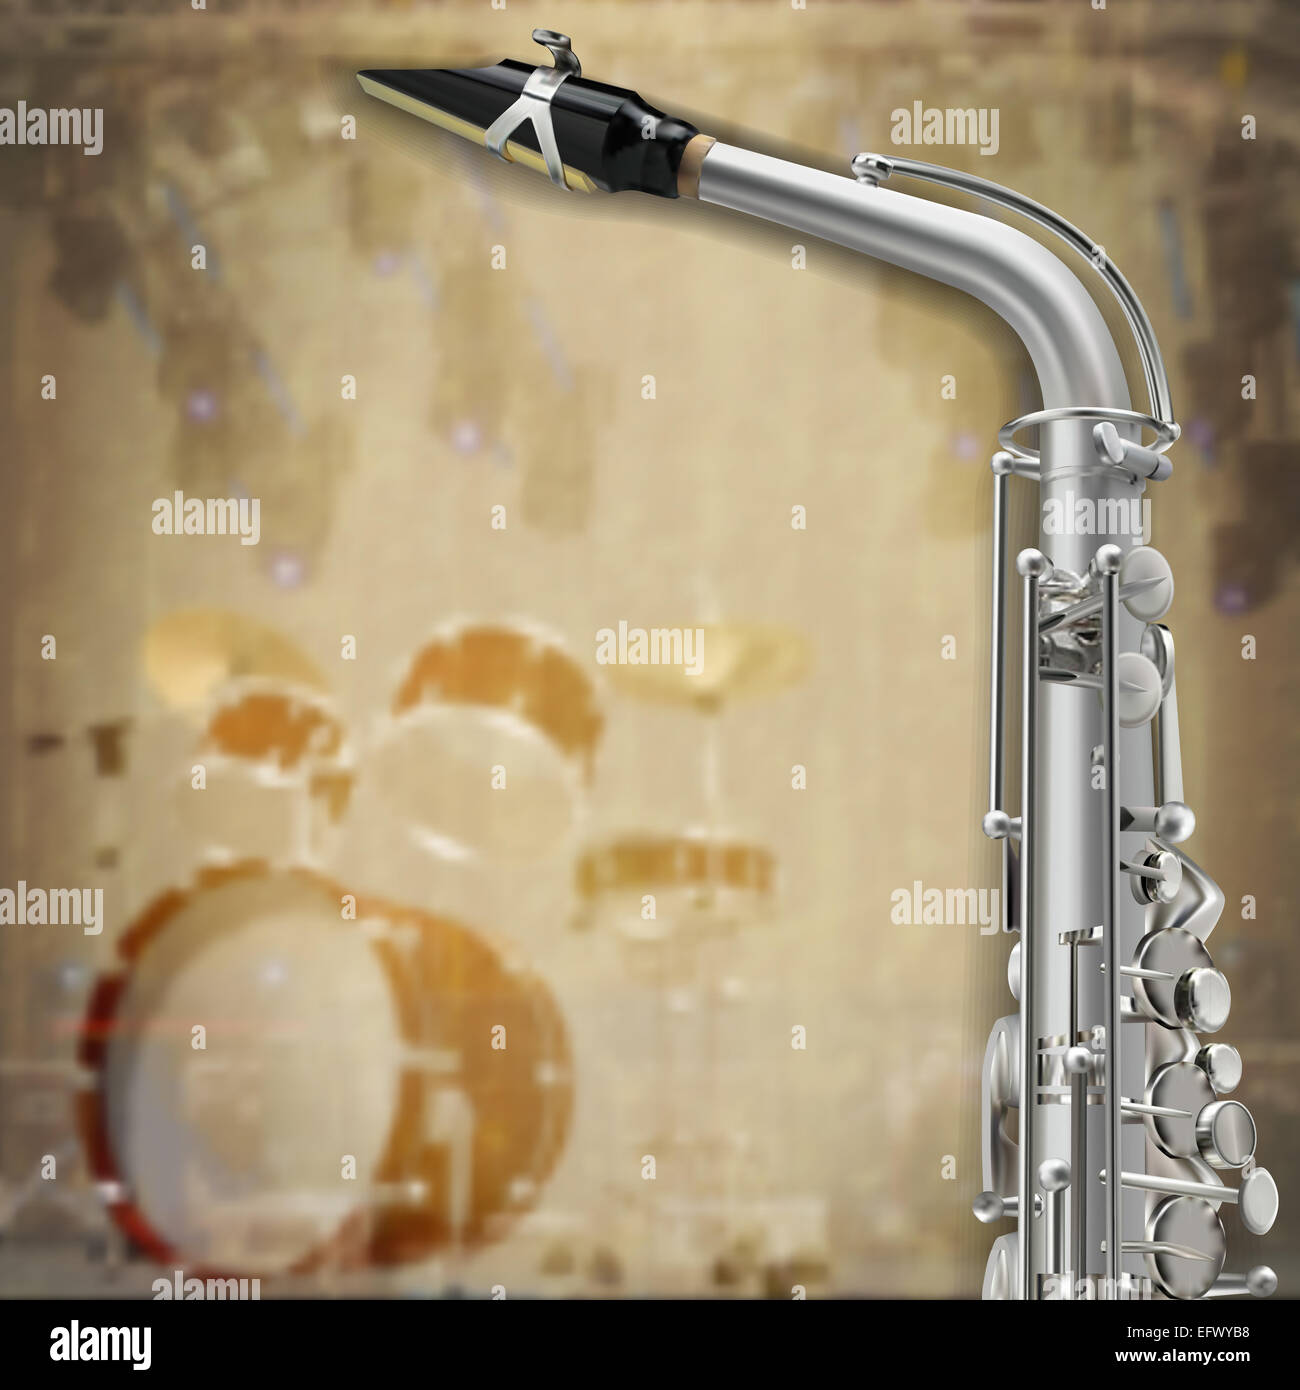 abstract music grunge background with saxophone and drum kit Stock Photo